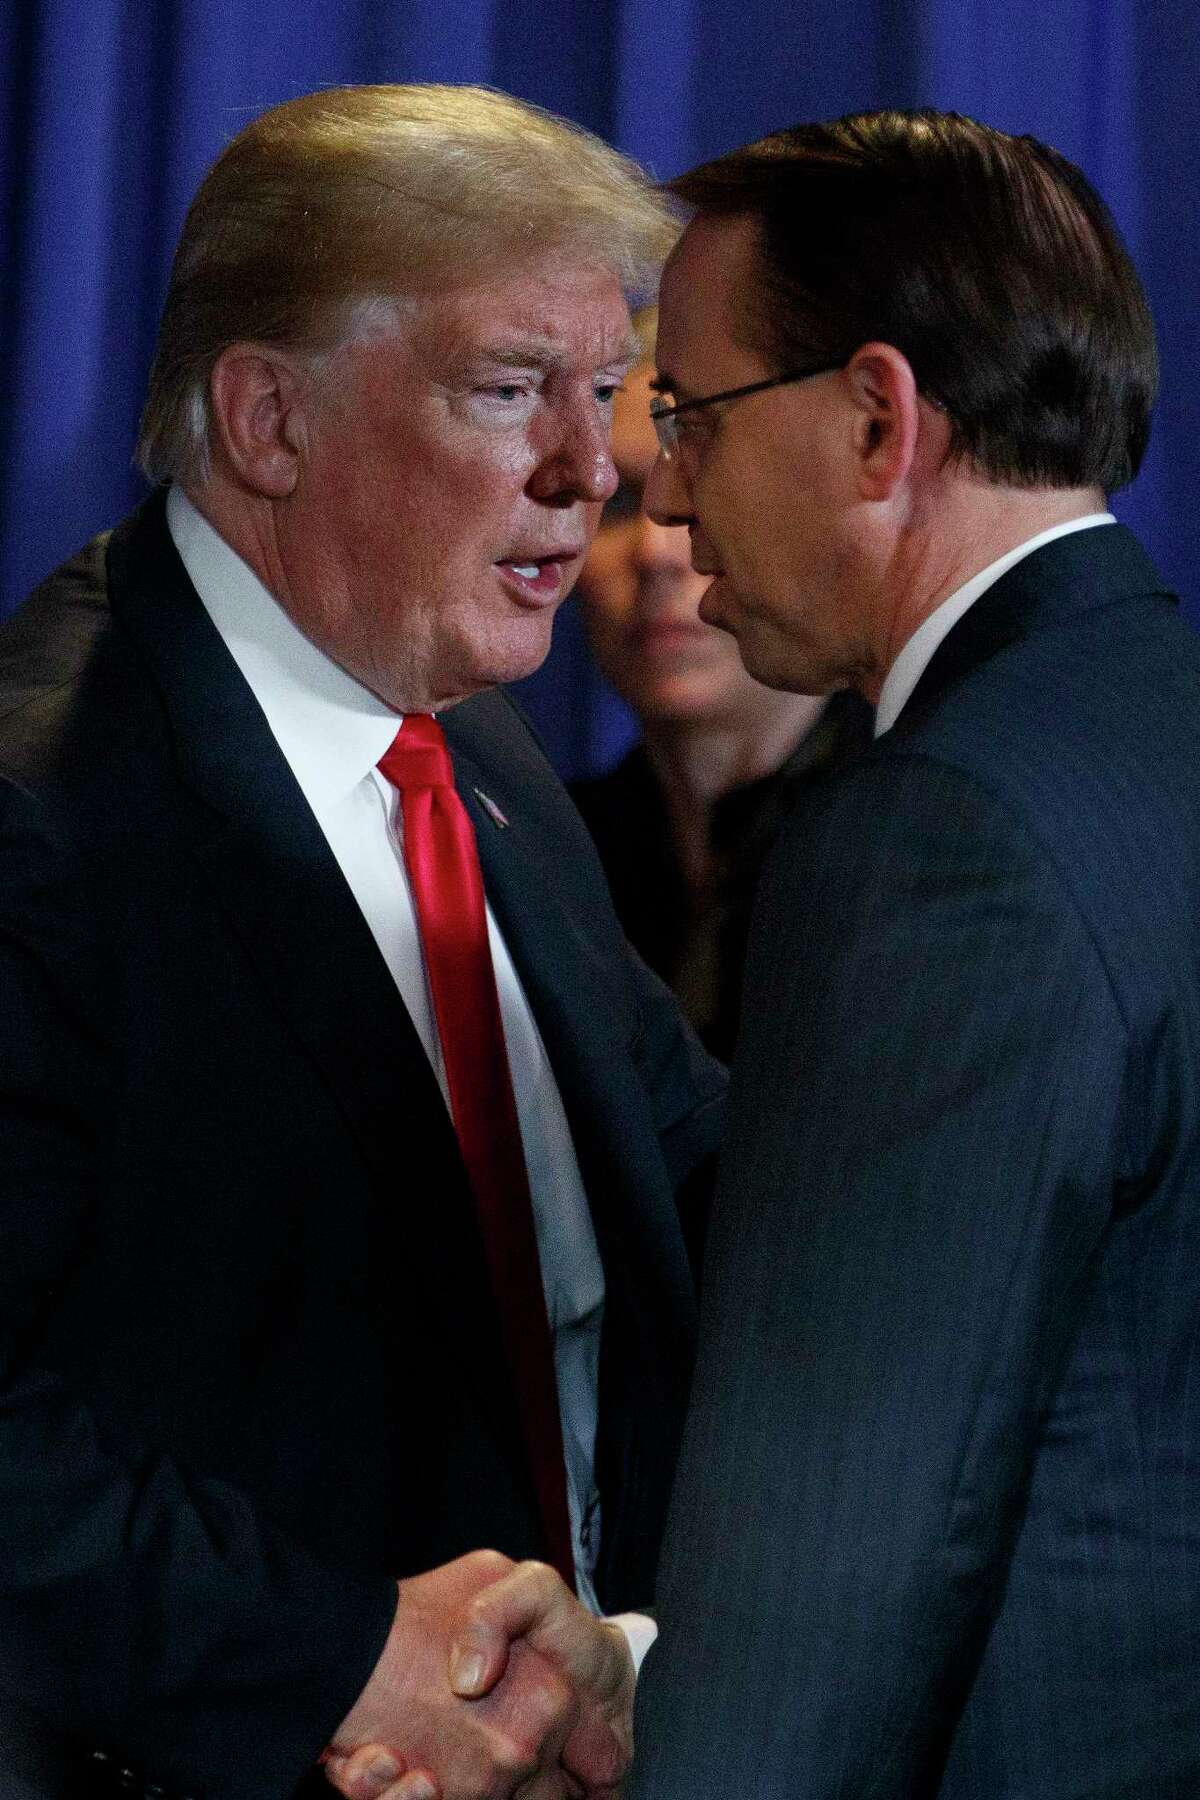 FILE -- President Donald Trump speaks with Rod Rosenstein, the deputy attorney general, at a forum on immigration policy and gangs in Bethpage, N.Y., on May 23, 2018. (Tom Brenner/The New York Times)